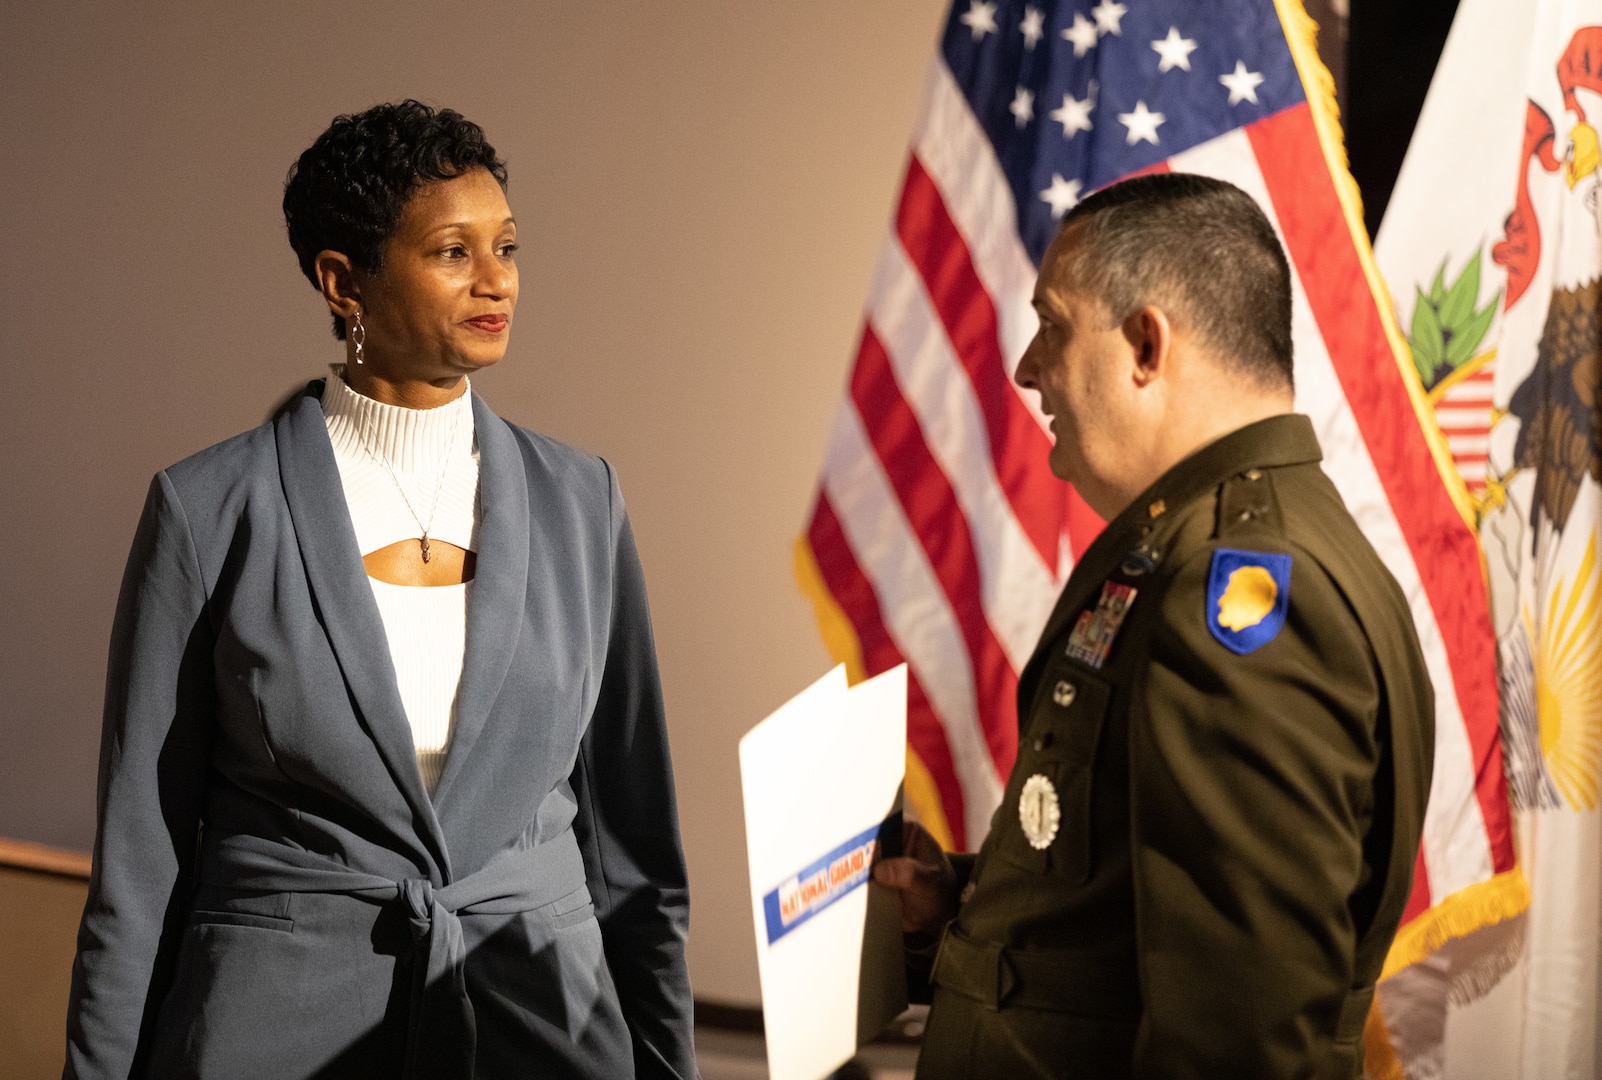 Brig. Gen. Mark Alessia, Director of the Joint Staff, ILNG, speaks with keynote speaker, Lt. Col. (retired) Renysha Brown after a a Desert Storm remembrance ceremony at the Illinois State Military Museum Feb. 28, honoring the 18 service members from the state of Illinois who passed away. February 28, 2023, marks the 32nd anniversary of the cease fire announcement of the Persian Gulf War. We thank all the men and women who served our country in Operations Desert Shield and Desert Storm. (U.S. Army photo by Sgt. Trenton Fouche, Joint Force Headquarters - Illinois National Guard)